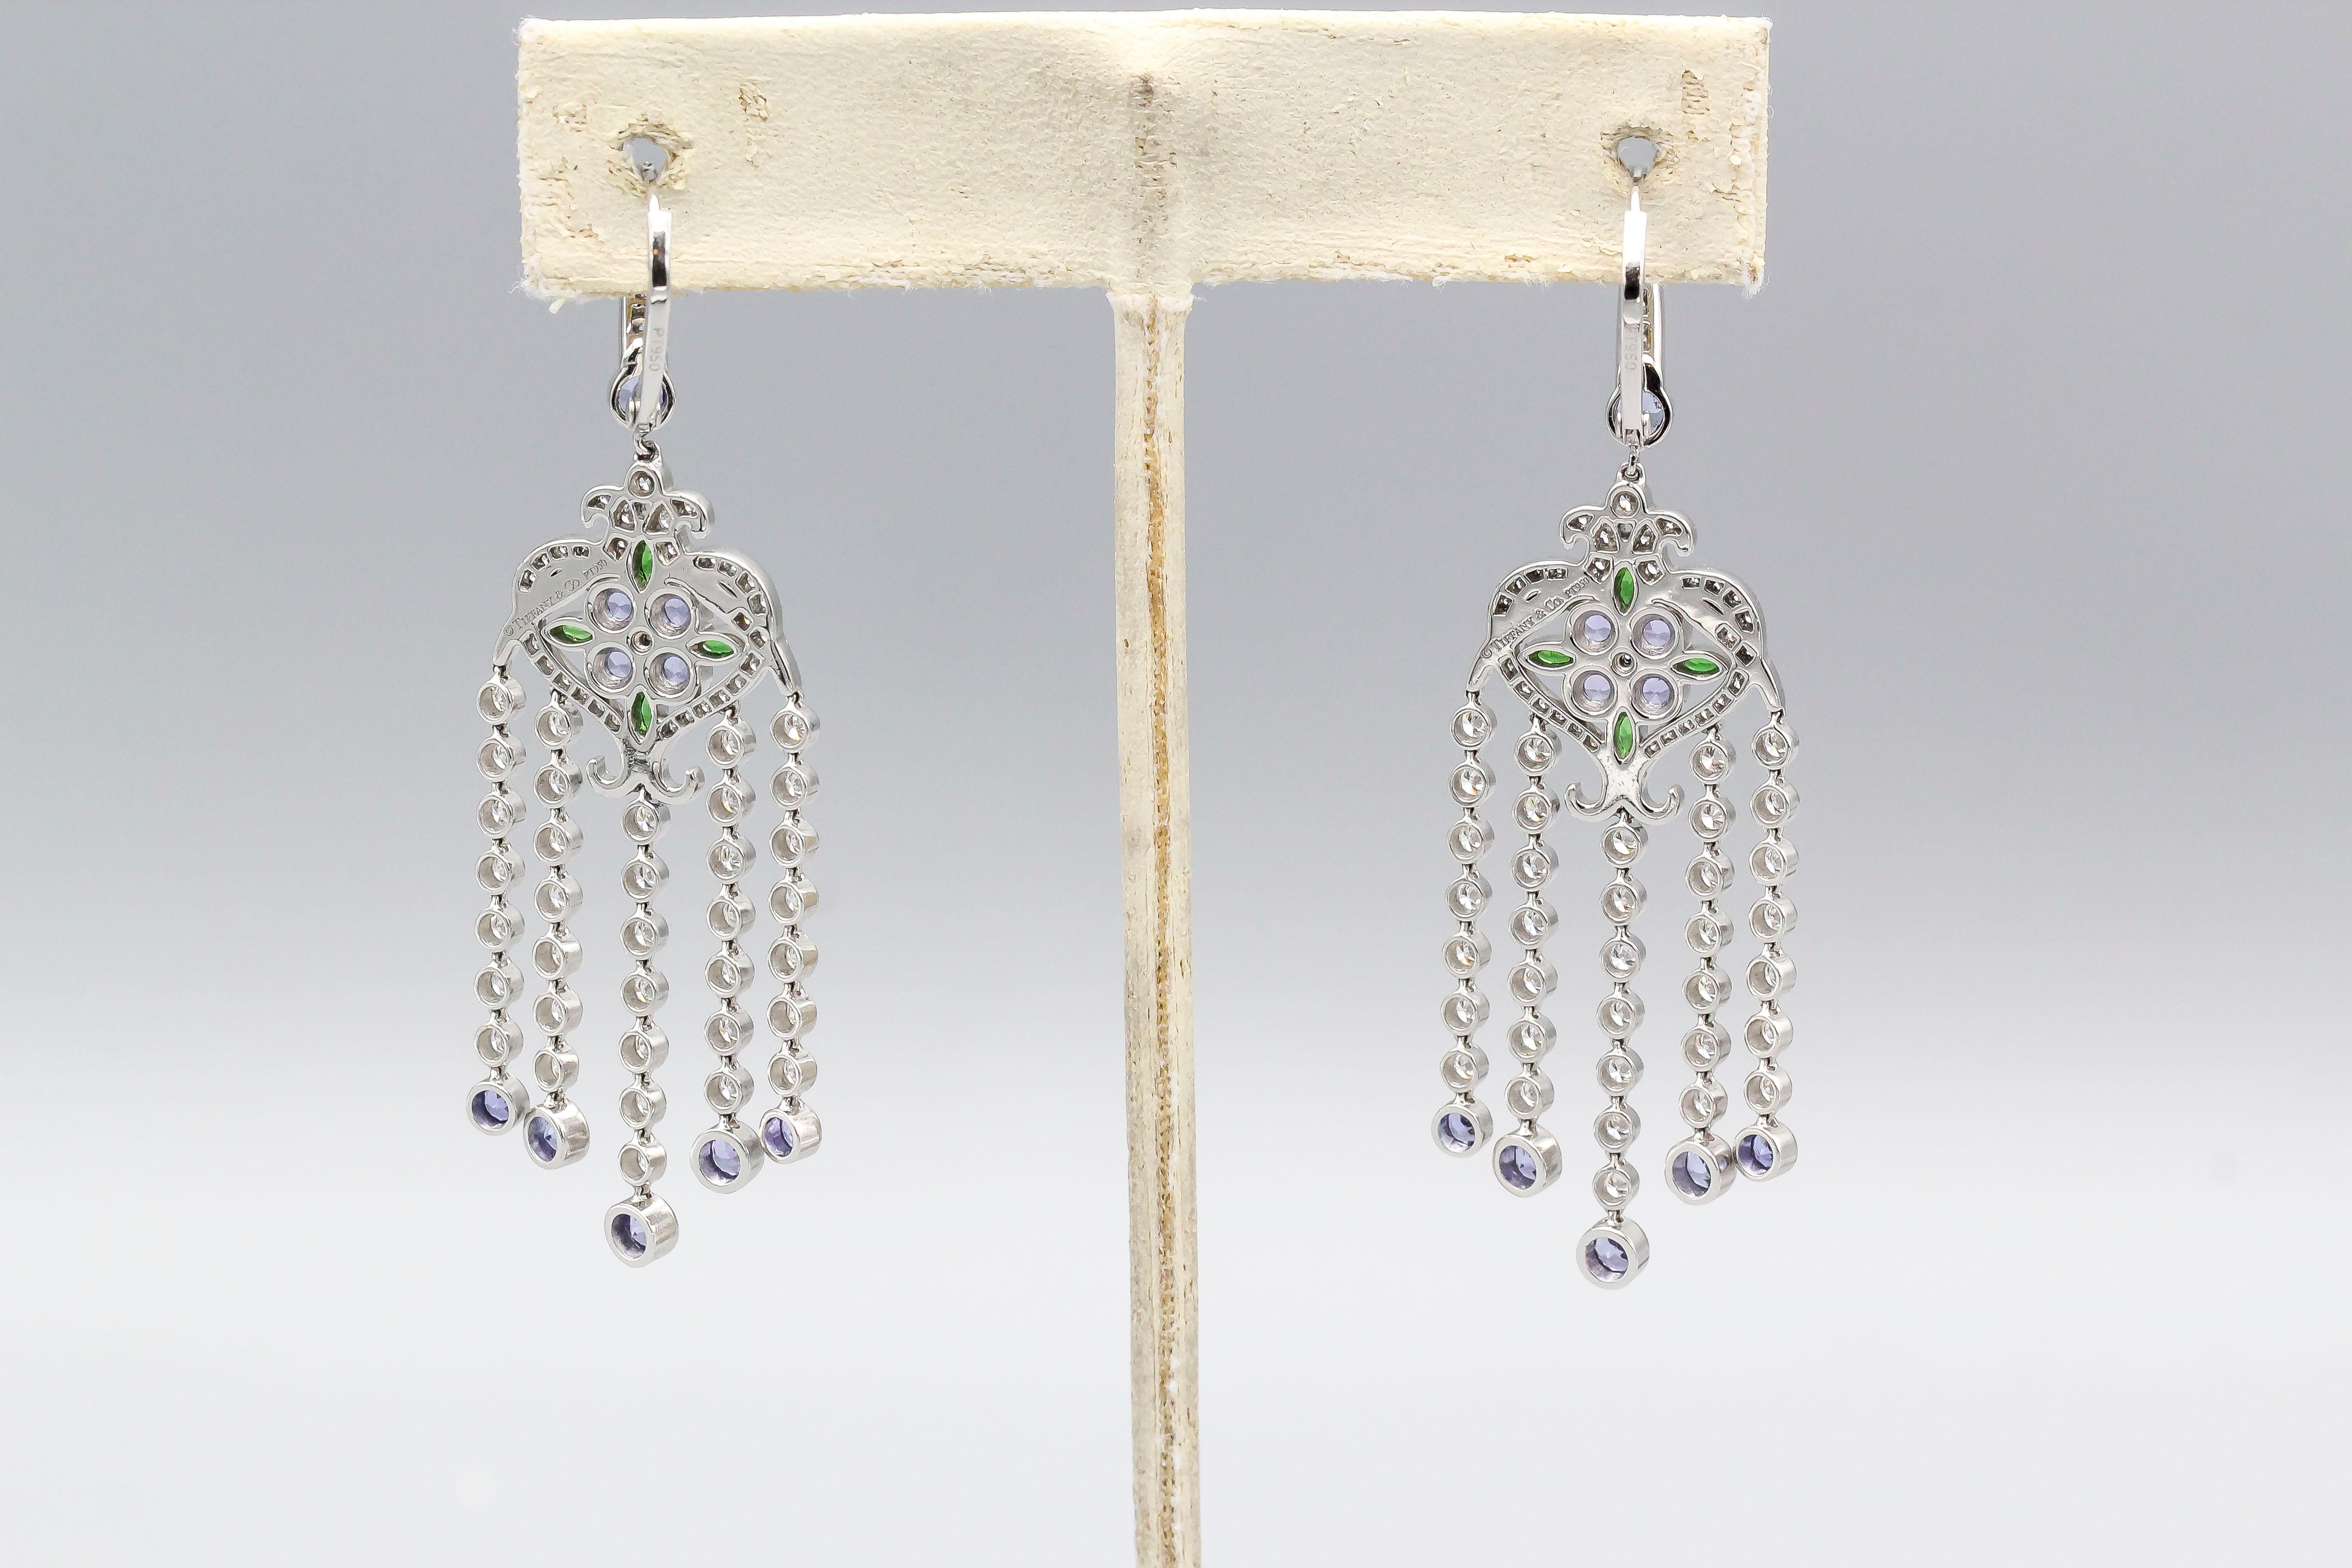 Elegant diamond, tanzanite, tsavorite and platinum dangle earrings by Tiffany & Co. They feature rich color stones, as well as high grade round brilliant cut diamonds over a platinum setting.

Hallmarks: Tiffany  & Co., PT950, copyright.